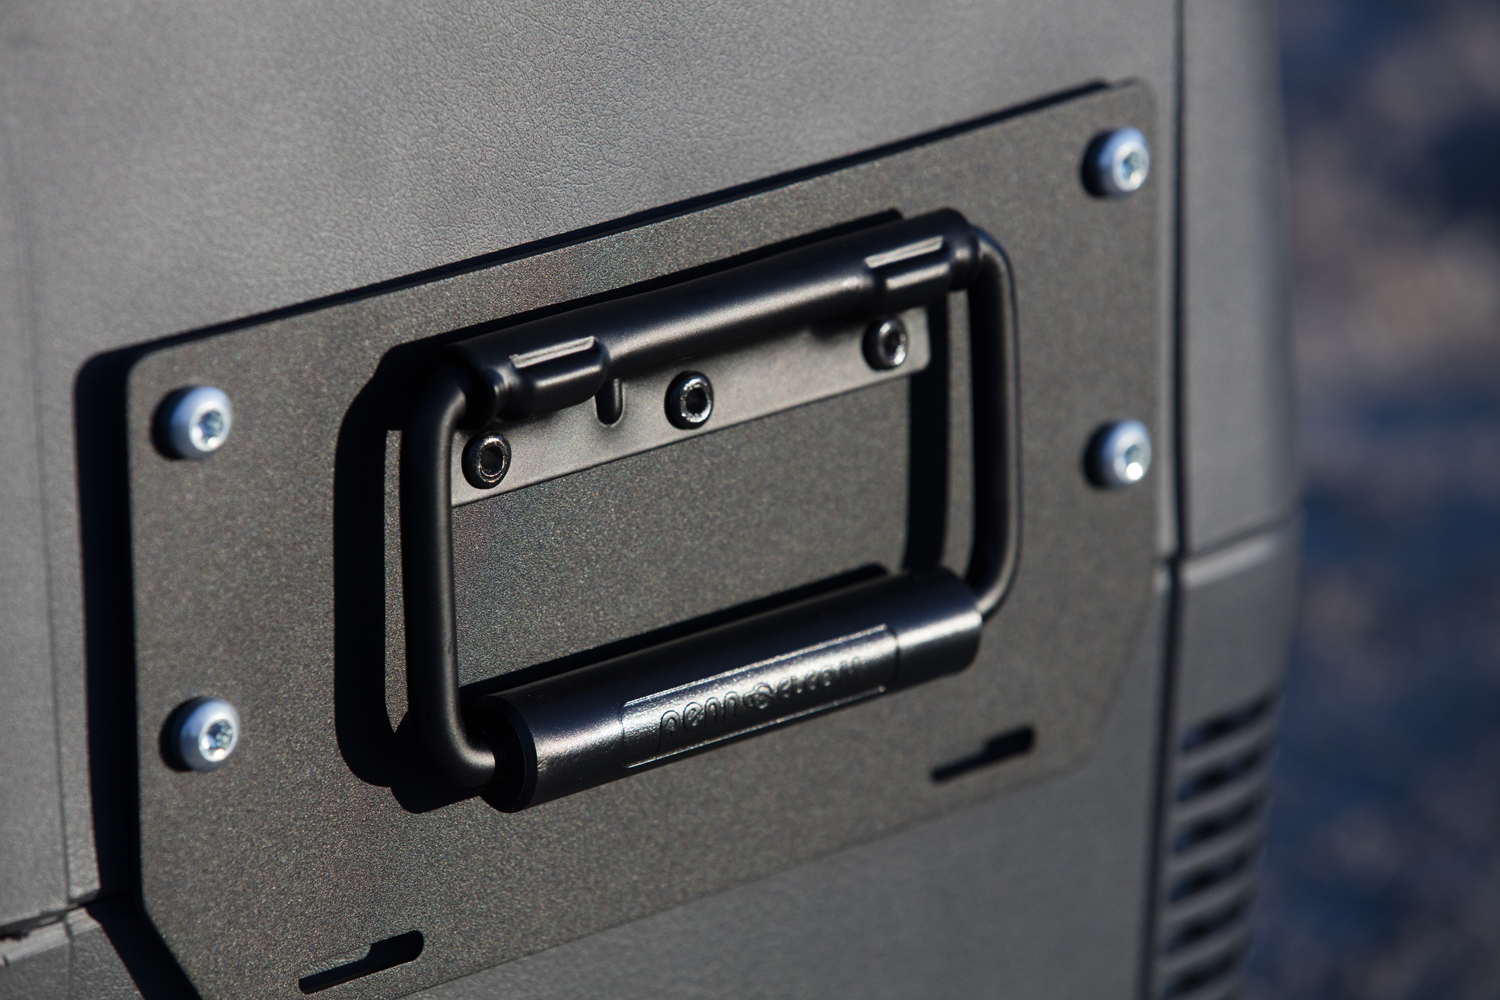 Engineered with compact, low-profile dimensions and custom handles, Webasto’s Fridge Freezer 31 fits securely below the beltline of the Jeep Wrangler.